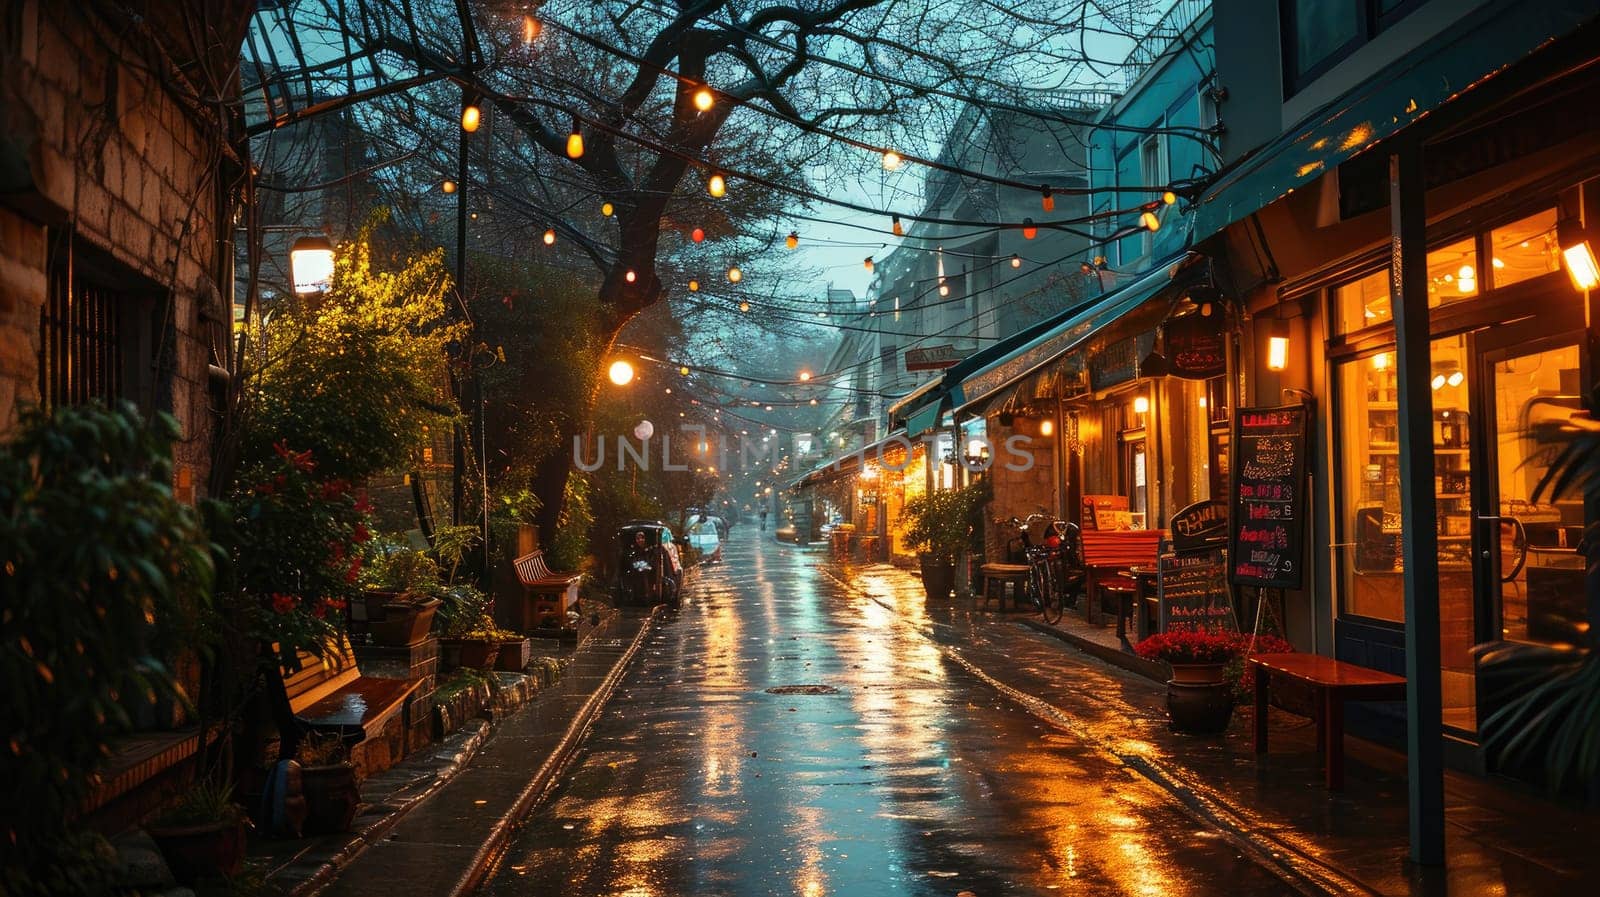 A street with yellow lights after rain creates a cozy atmosphere by Yurich32